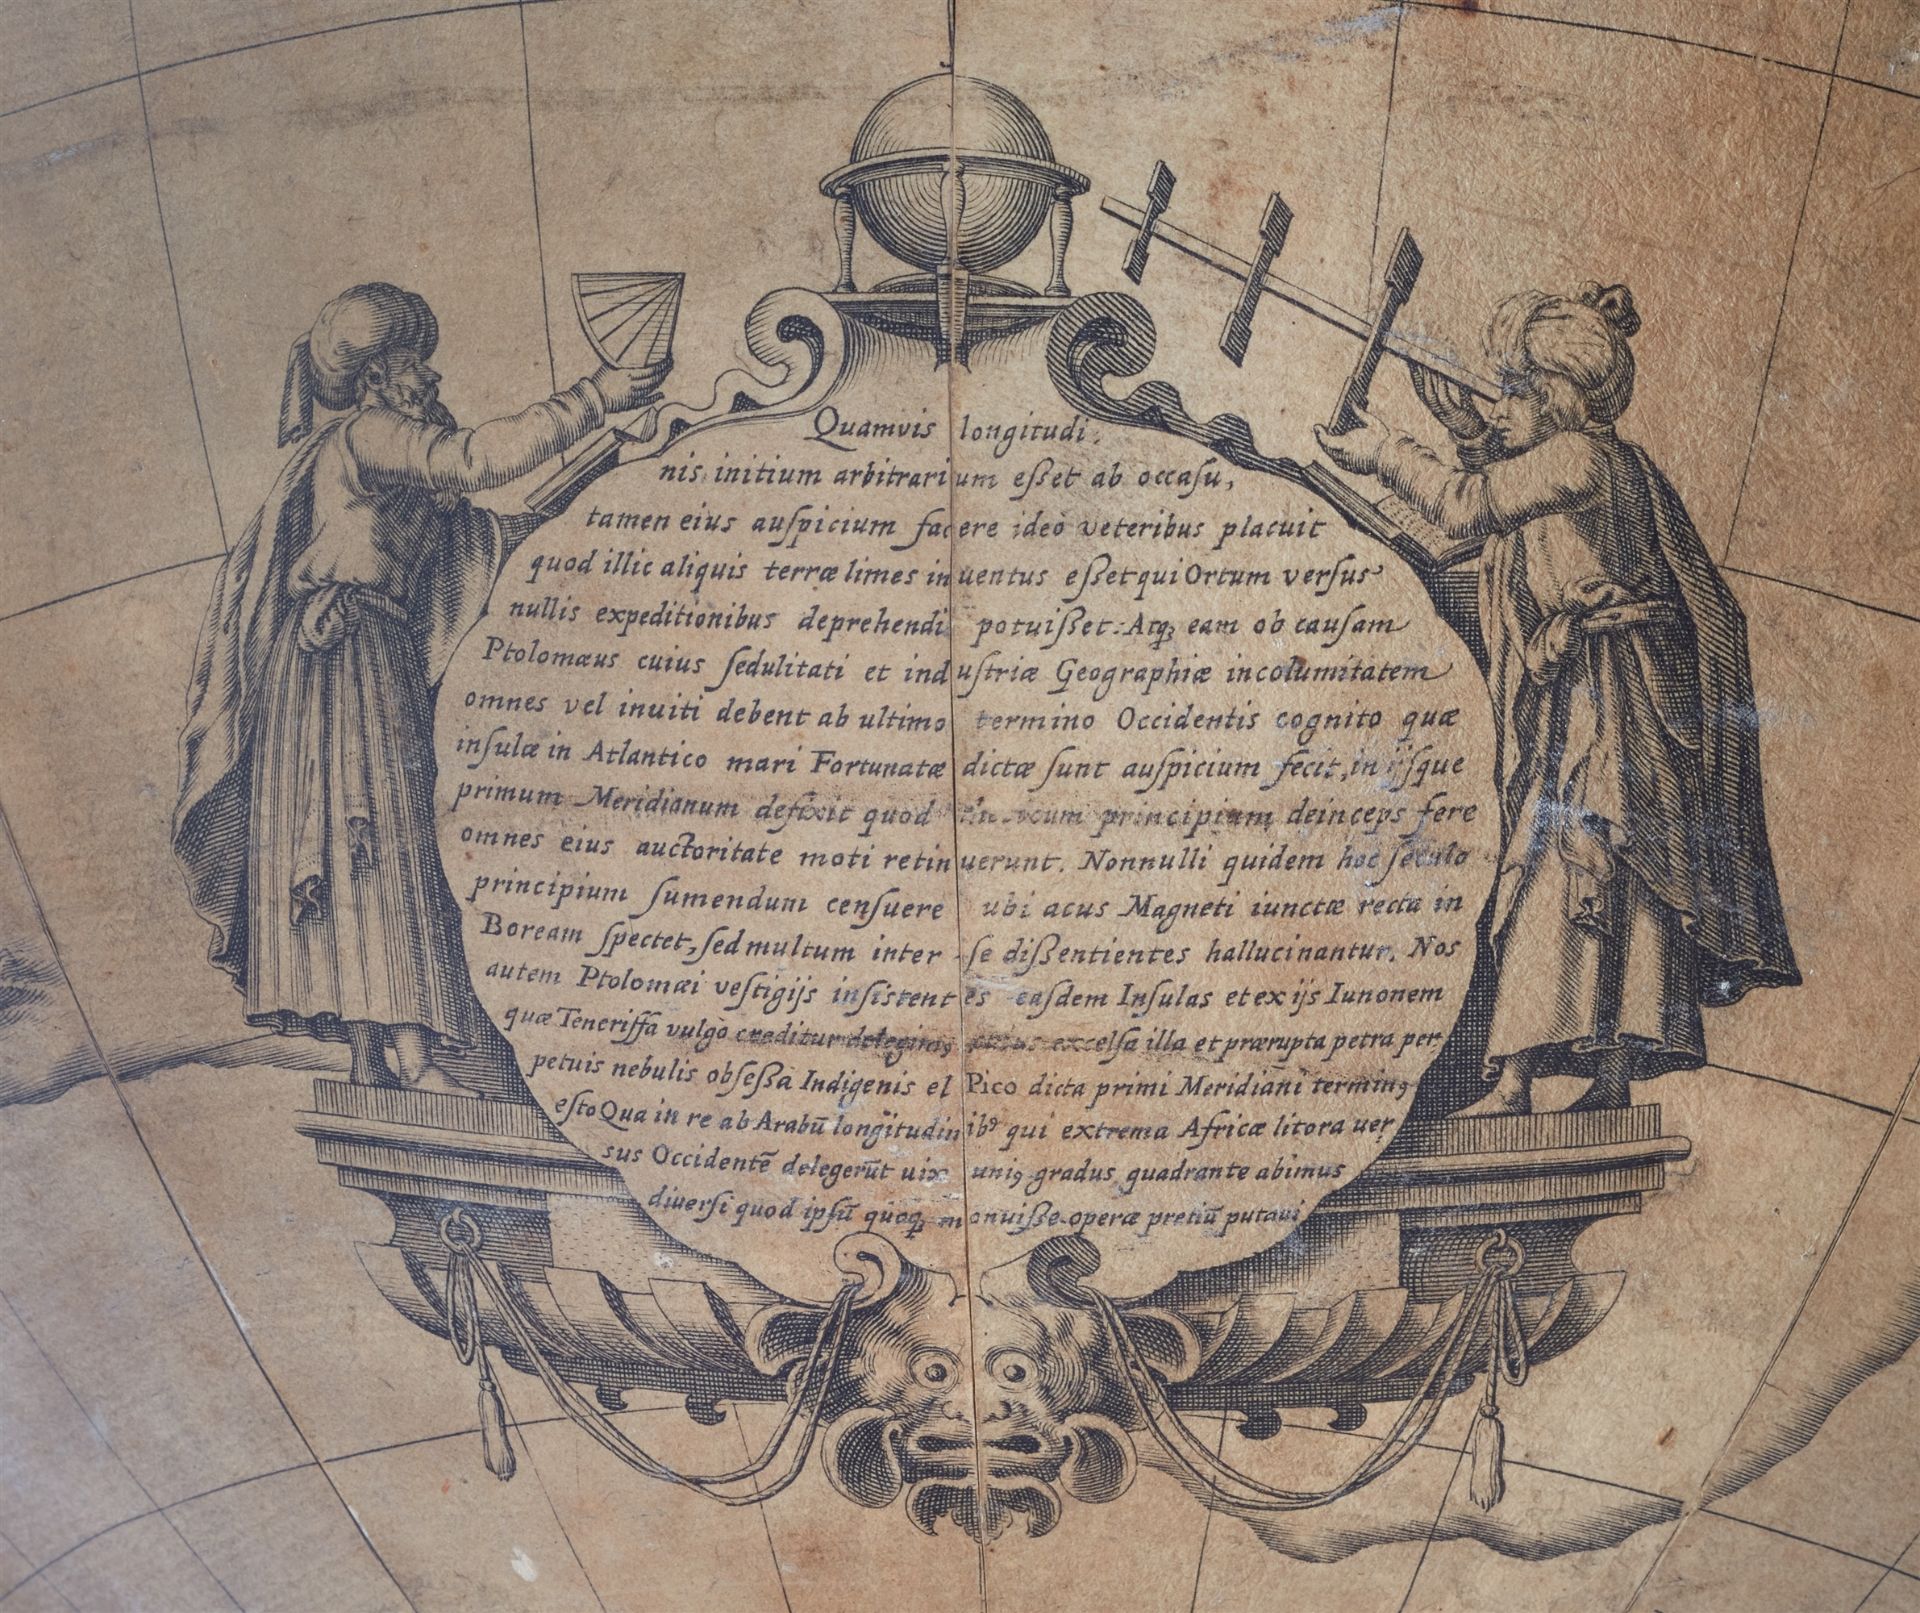 Celestial and terrestrial globes by Matthaeus Greuter - Image 6 of 6